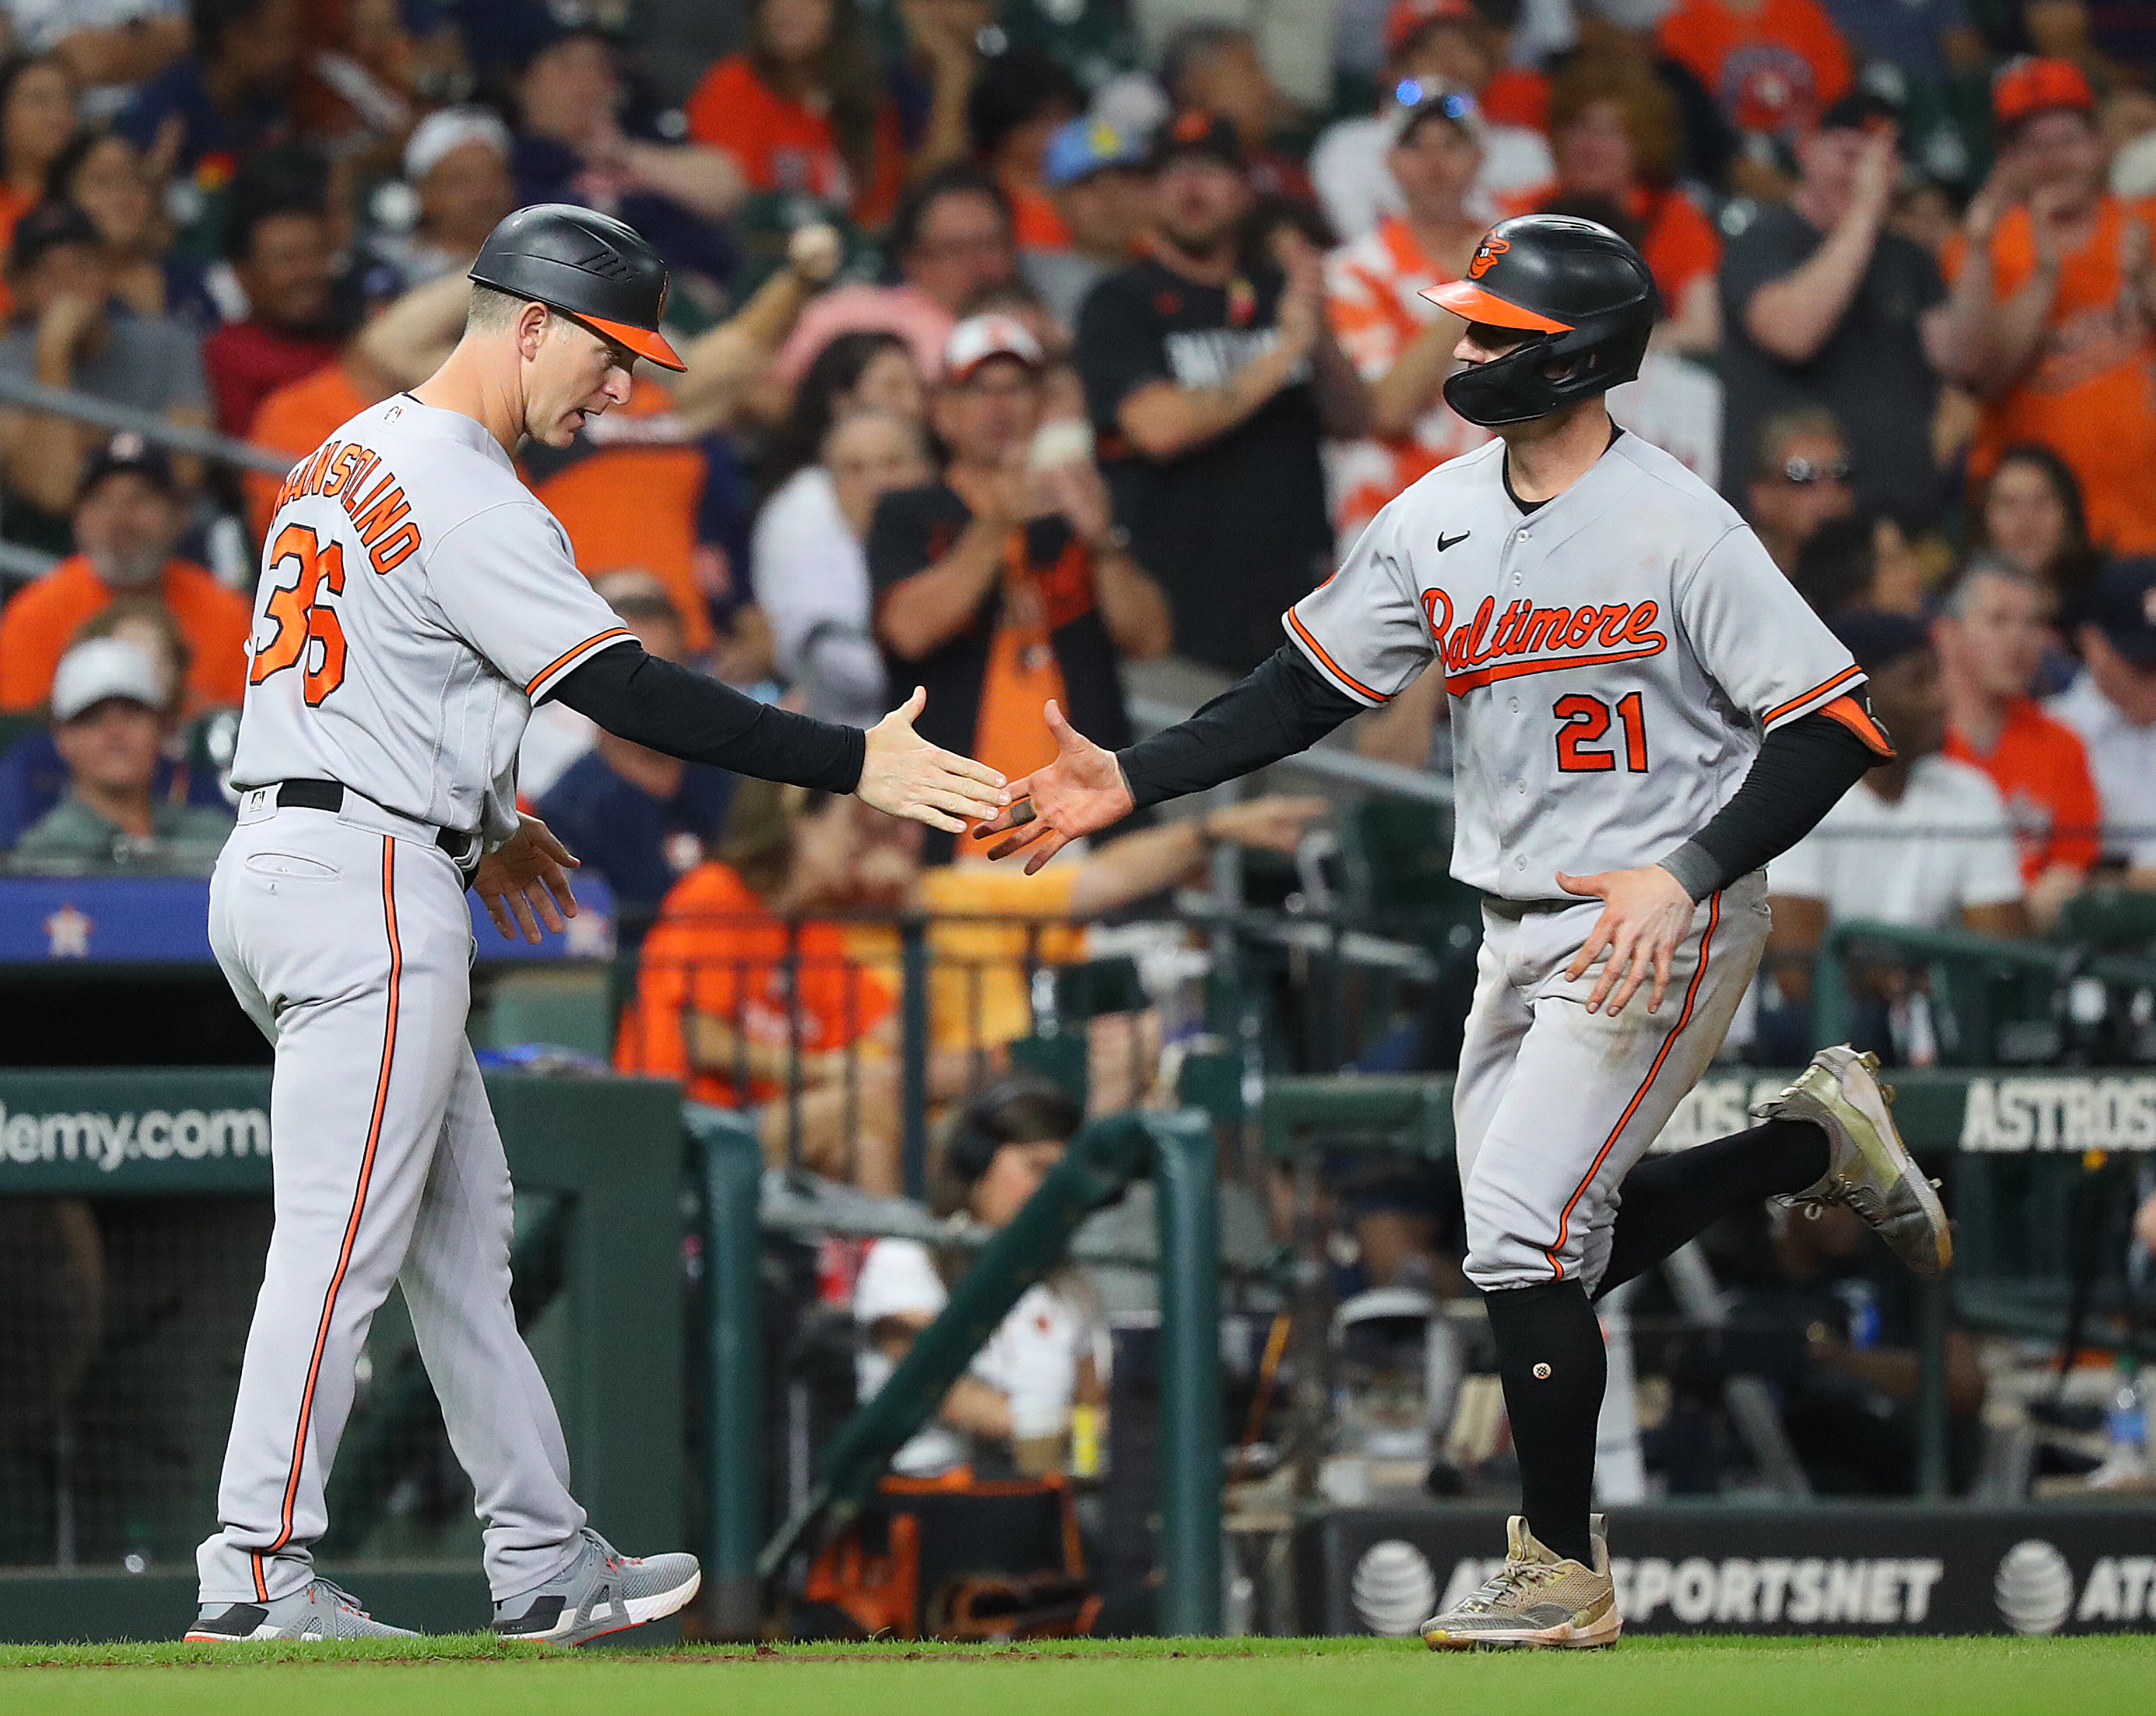 Austin Hays of the Baltimore Orioles receives congratulations from Tony Mansolino after hitting a home run in the seventh inning at Minute Maid Park on September 19, 2023 in Houston, Texas.